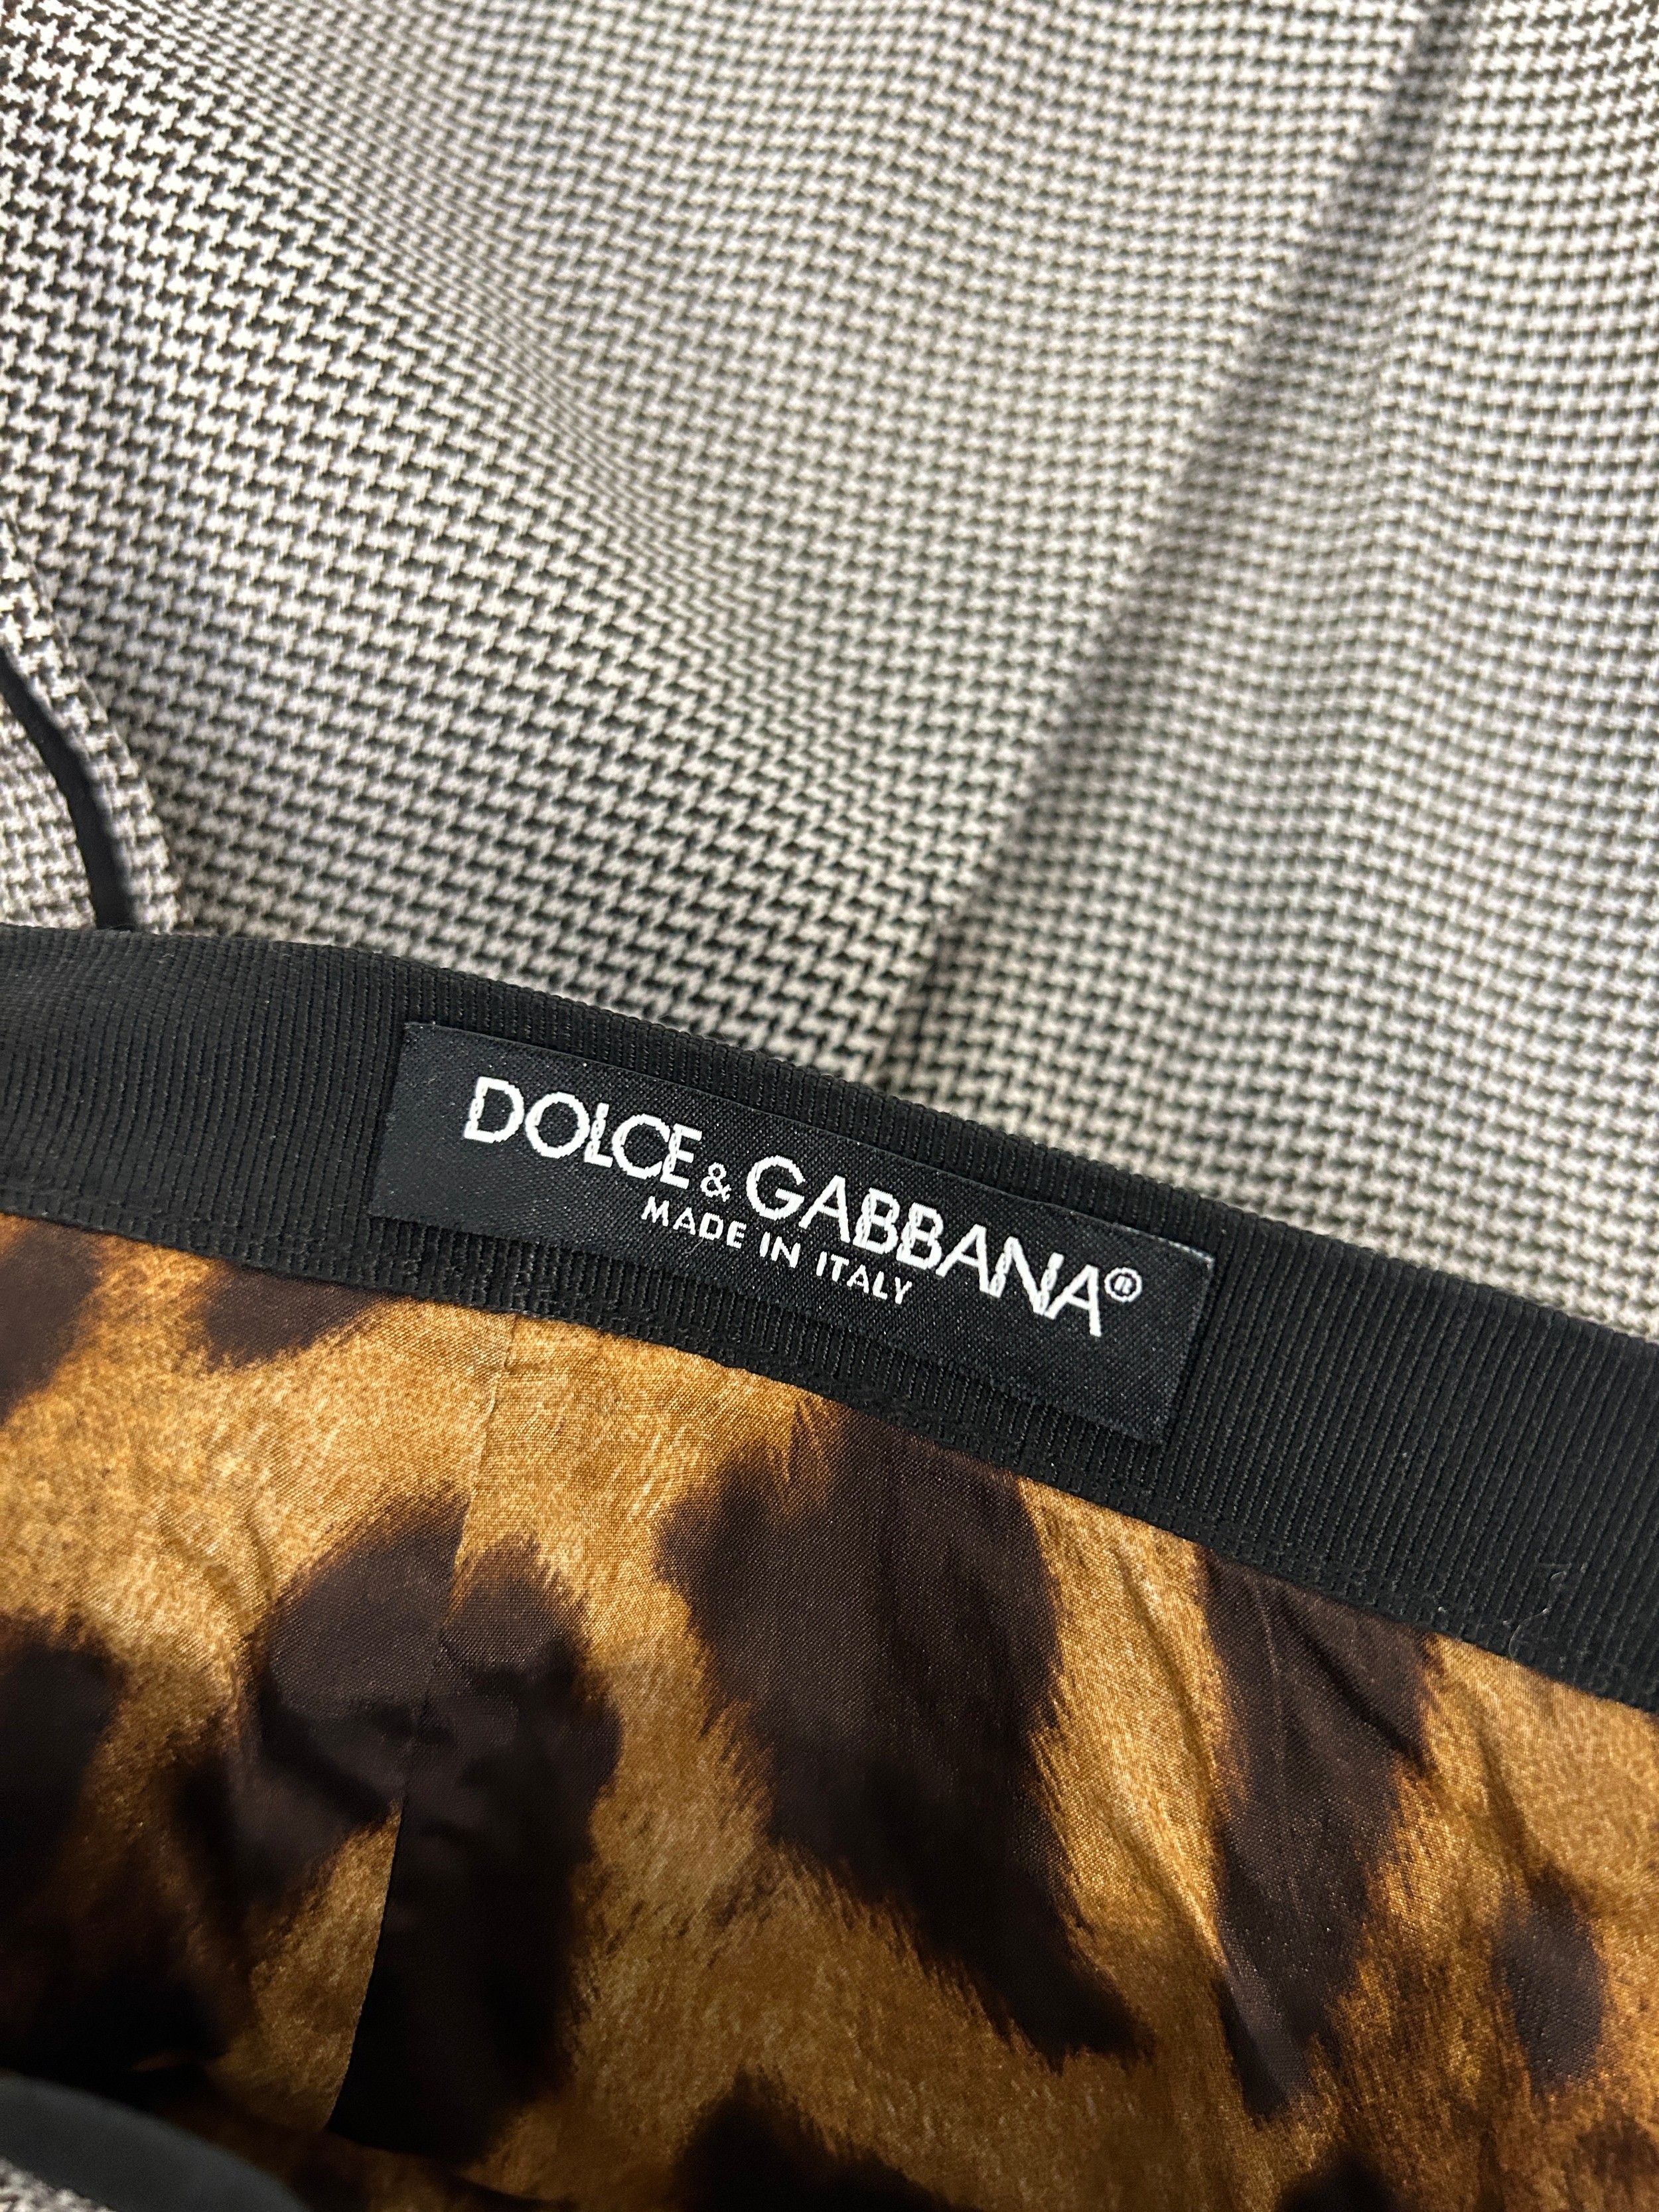 A DOLCE AND GABBANA TWO PIECE SUIT, Both size 42. - Image 5 of 5